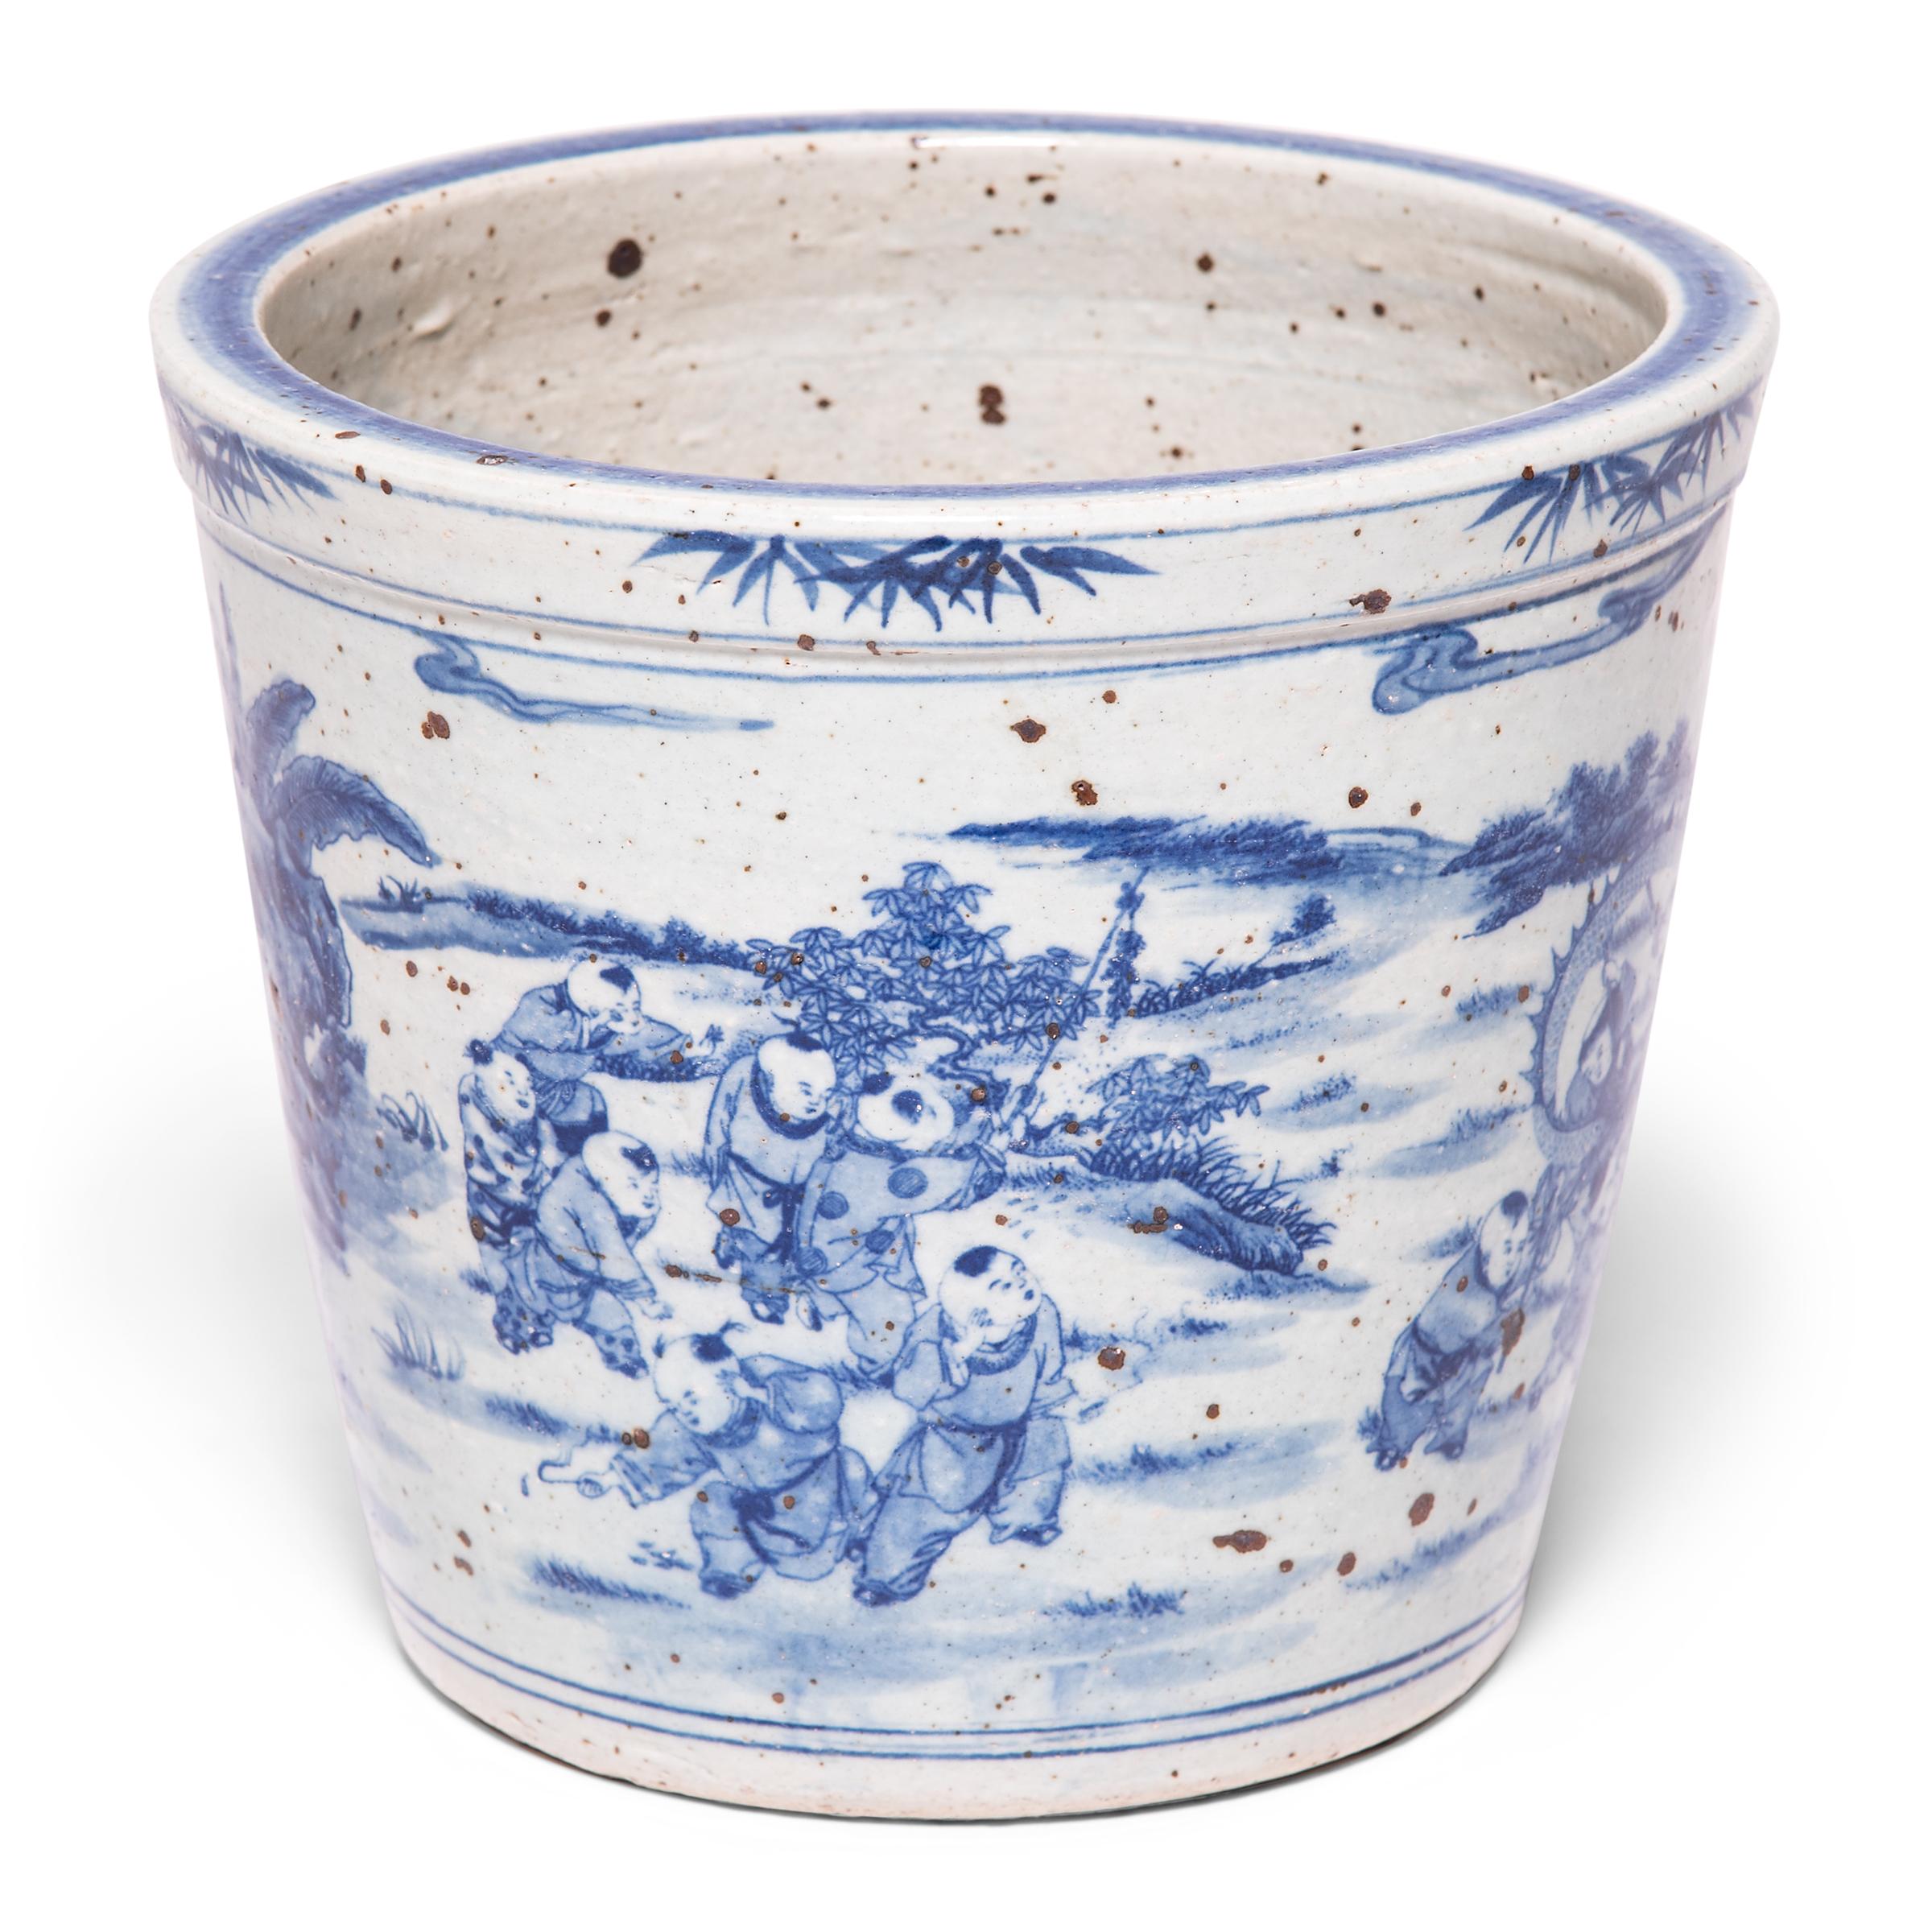 Chinese blue and white ceramics have inspired ceramists worldwide since cobalt was first introduced to China from the Middle East thousands of years ago. This porcelain jar was once a feature of a Qing-dynasty scholar's studio, and was intended to